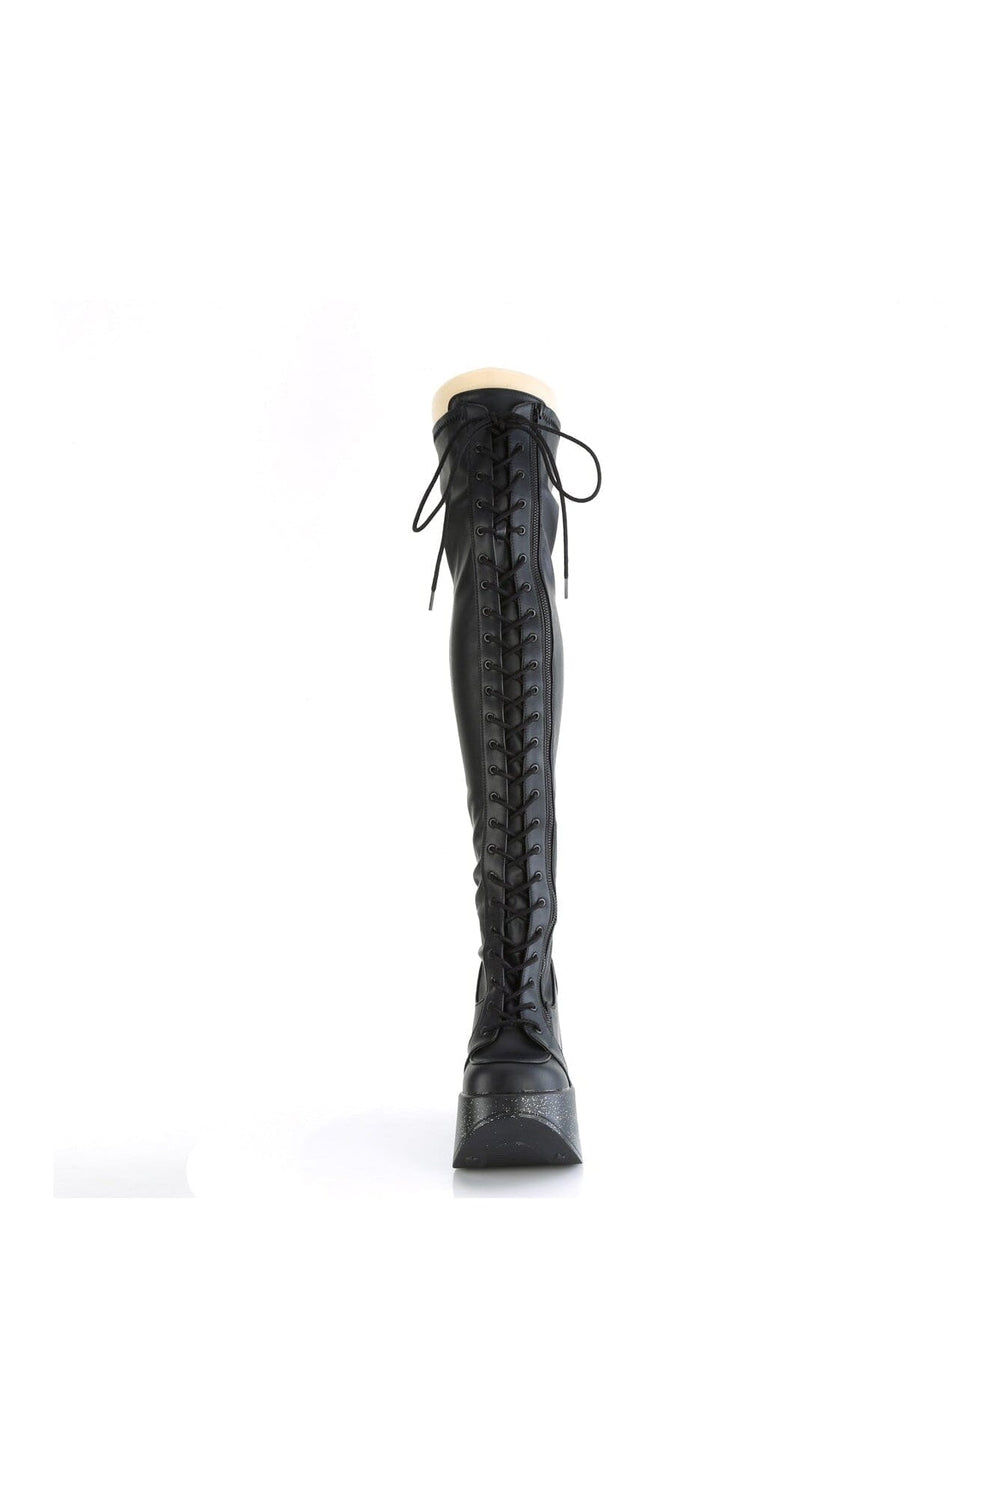 DYNAMITE-300 Black Vegan Leather Thigh Boot-Thigh Boots-Demonia-SEXYSHOES.COM